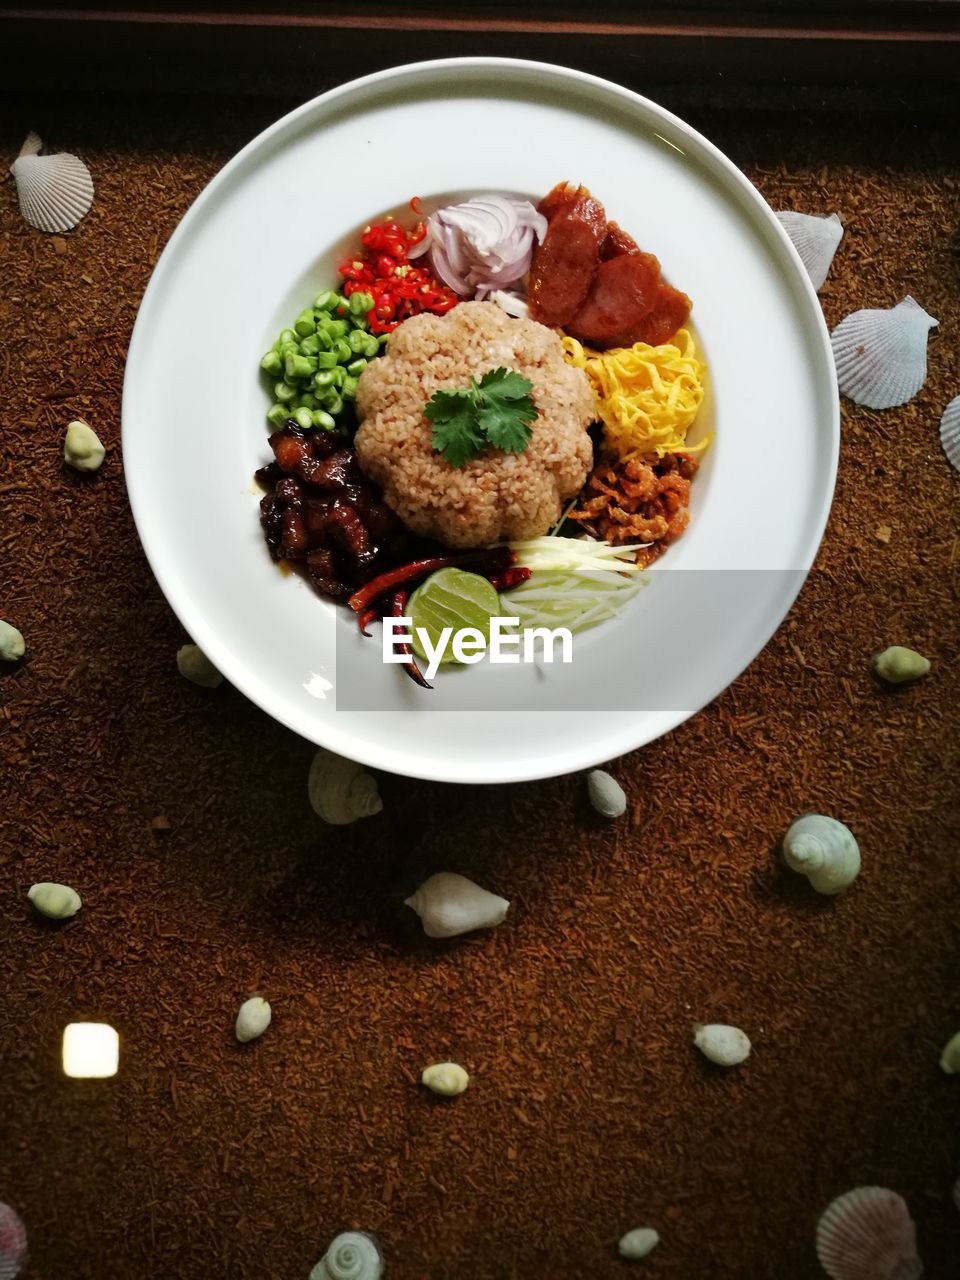 HIGH ANGLE VIEW OF FOOD SERVED IN PLATE